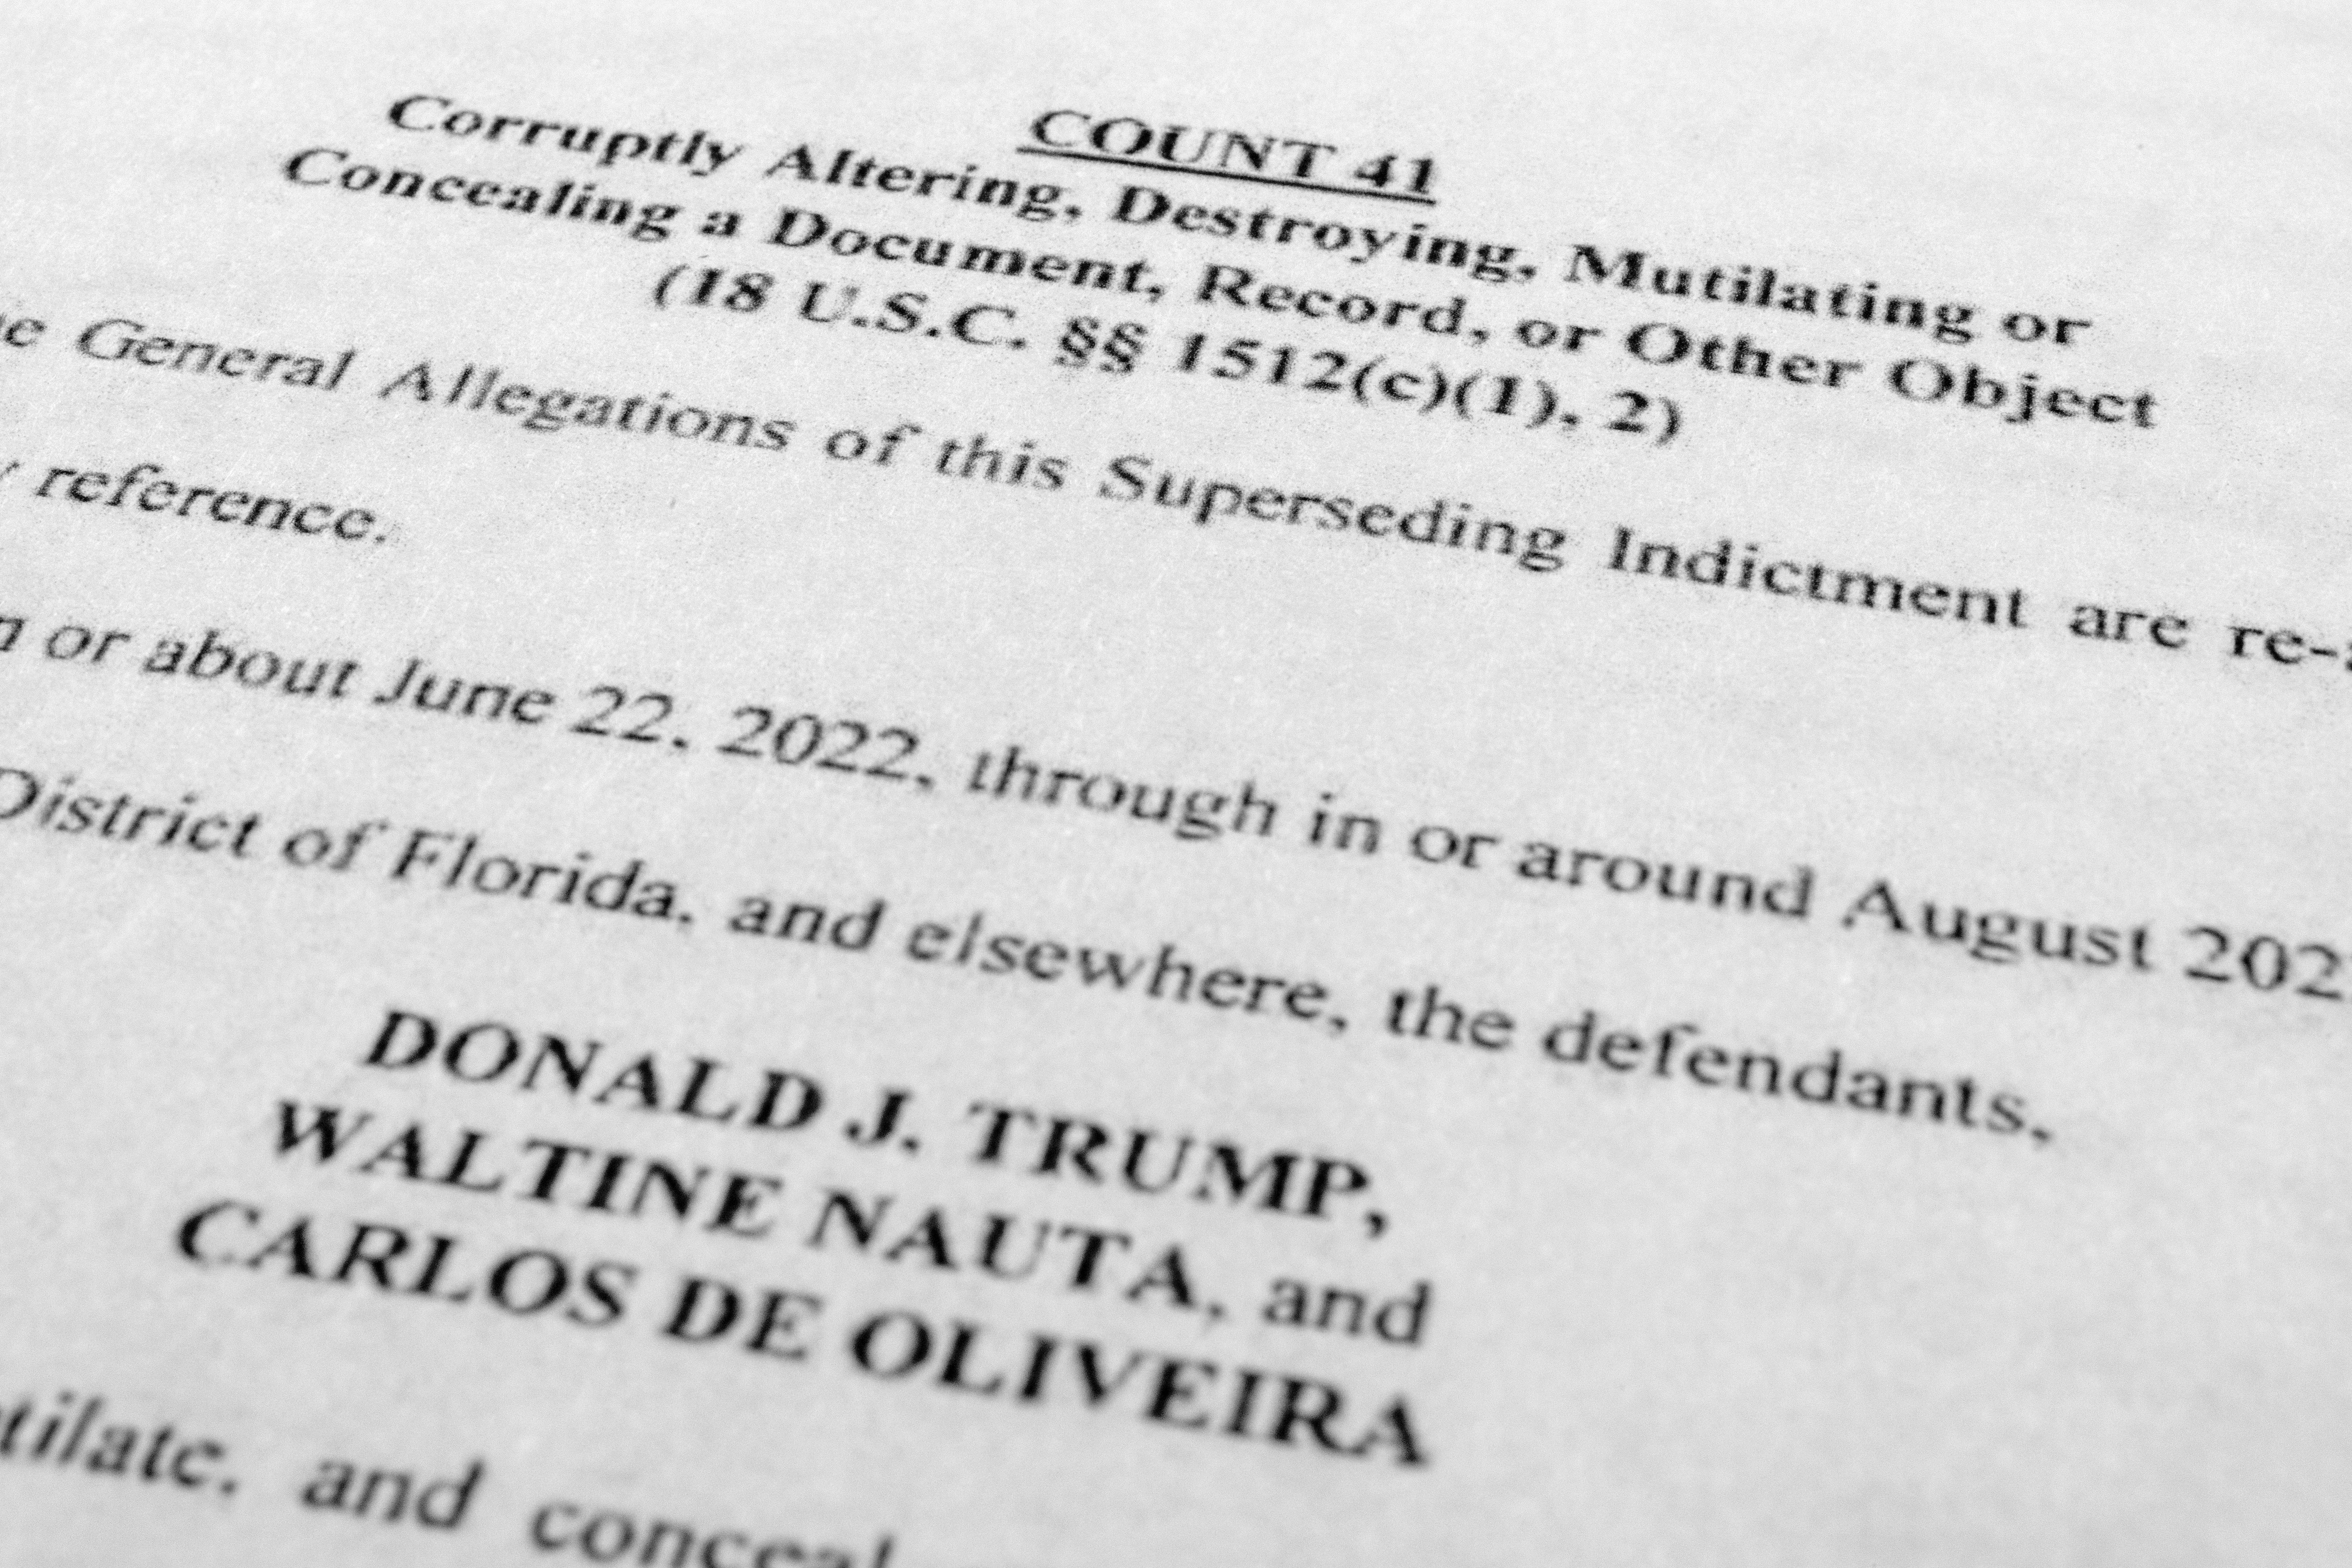 The updated indictment against former President Donald Trump, Walt Nauta and Carlos De Oliveira is photographed Thursday